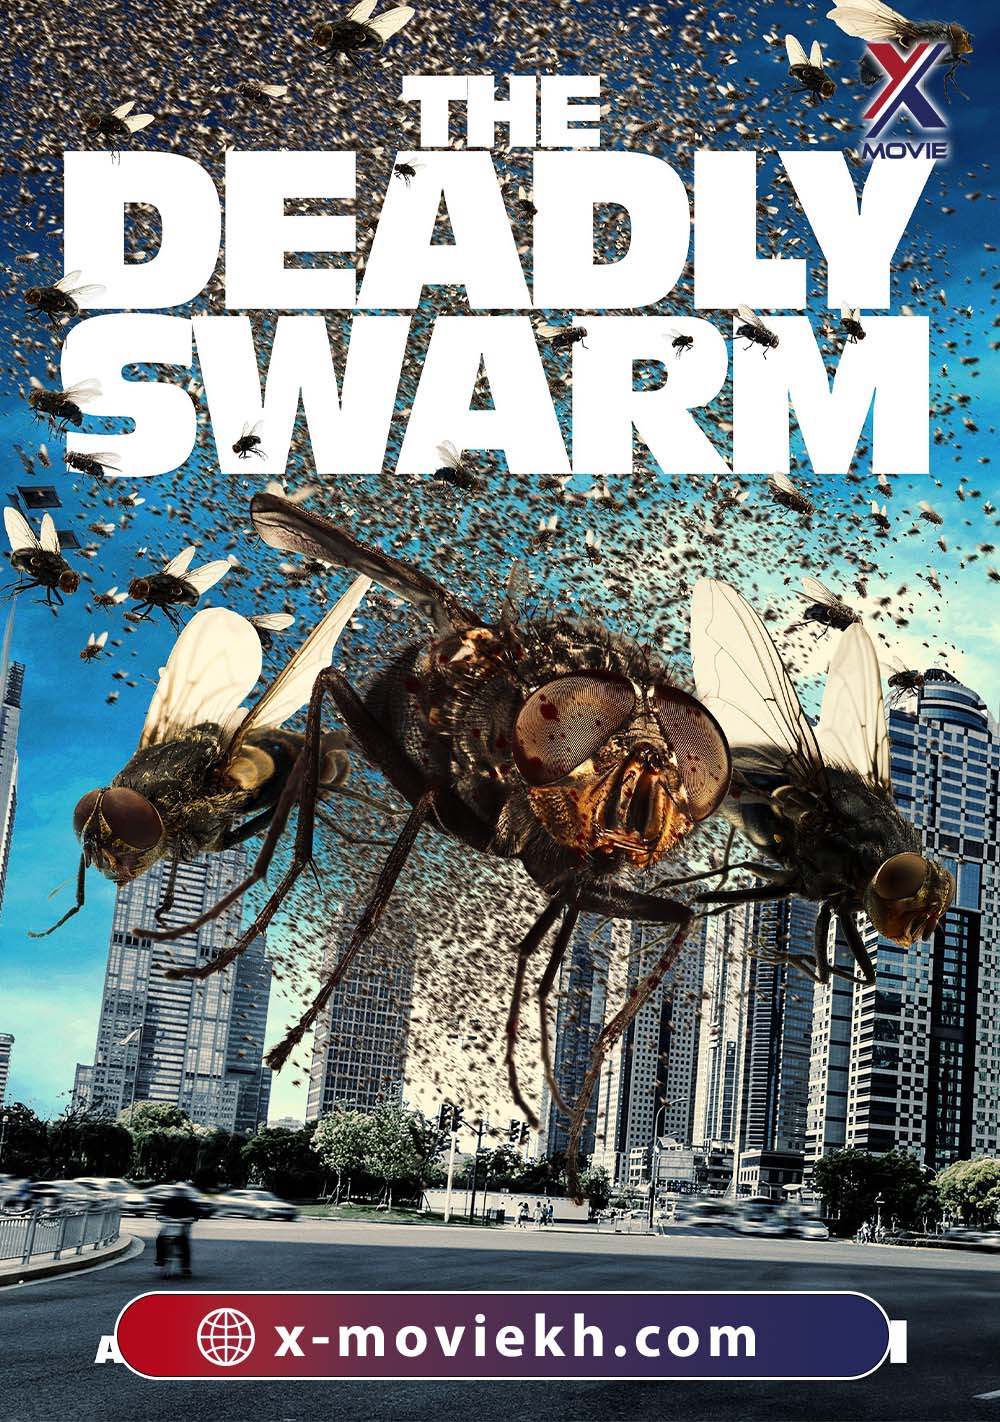 The Deadly Swarm